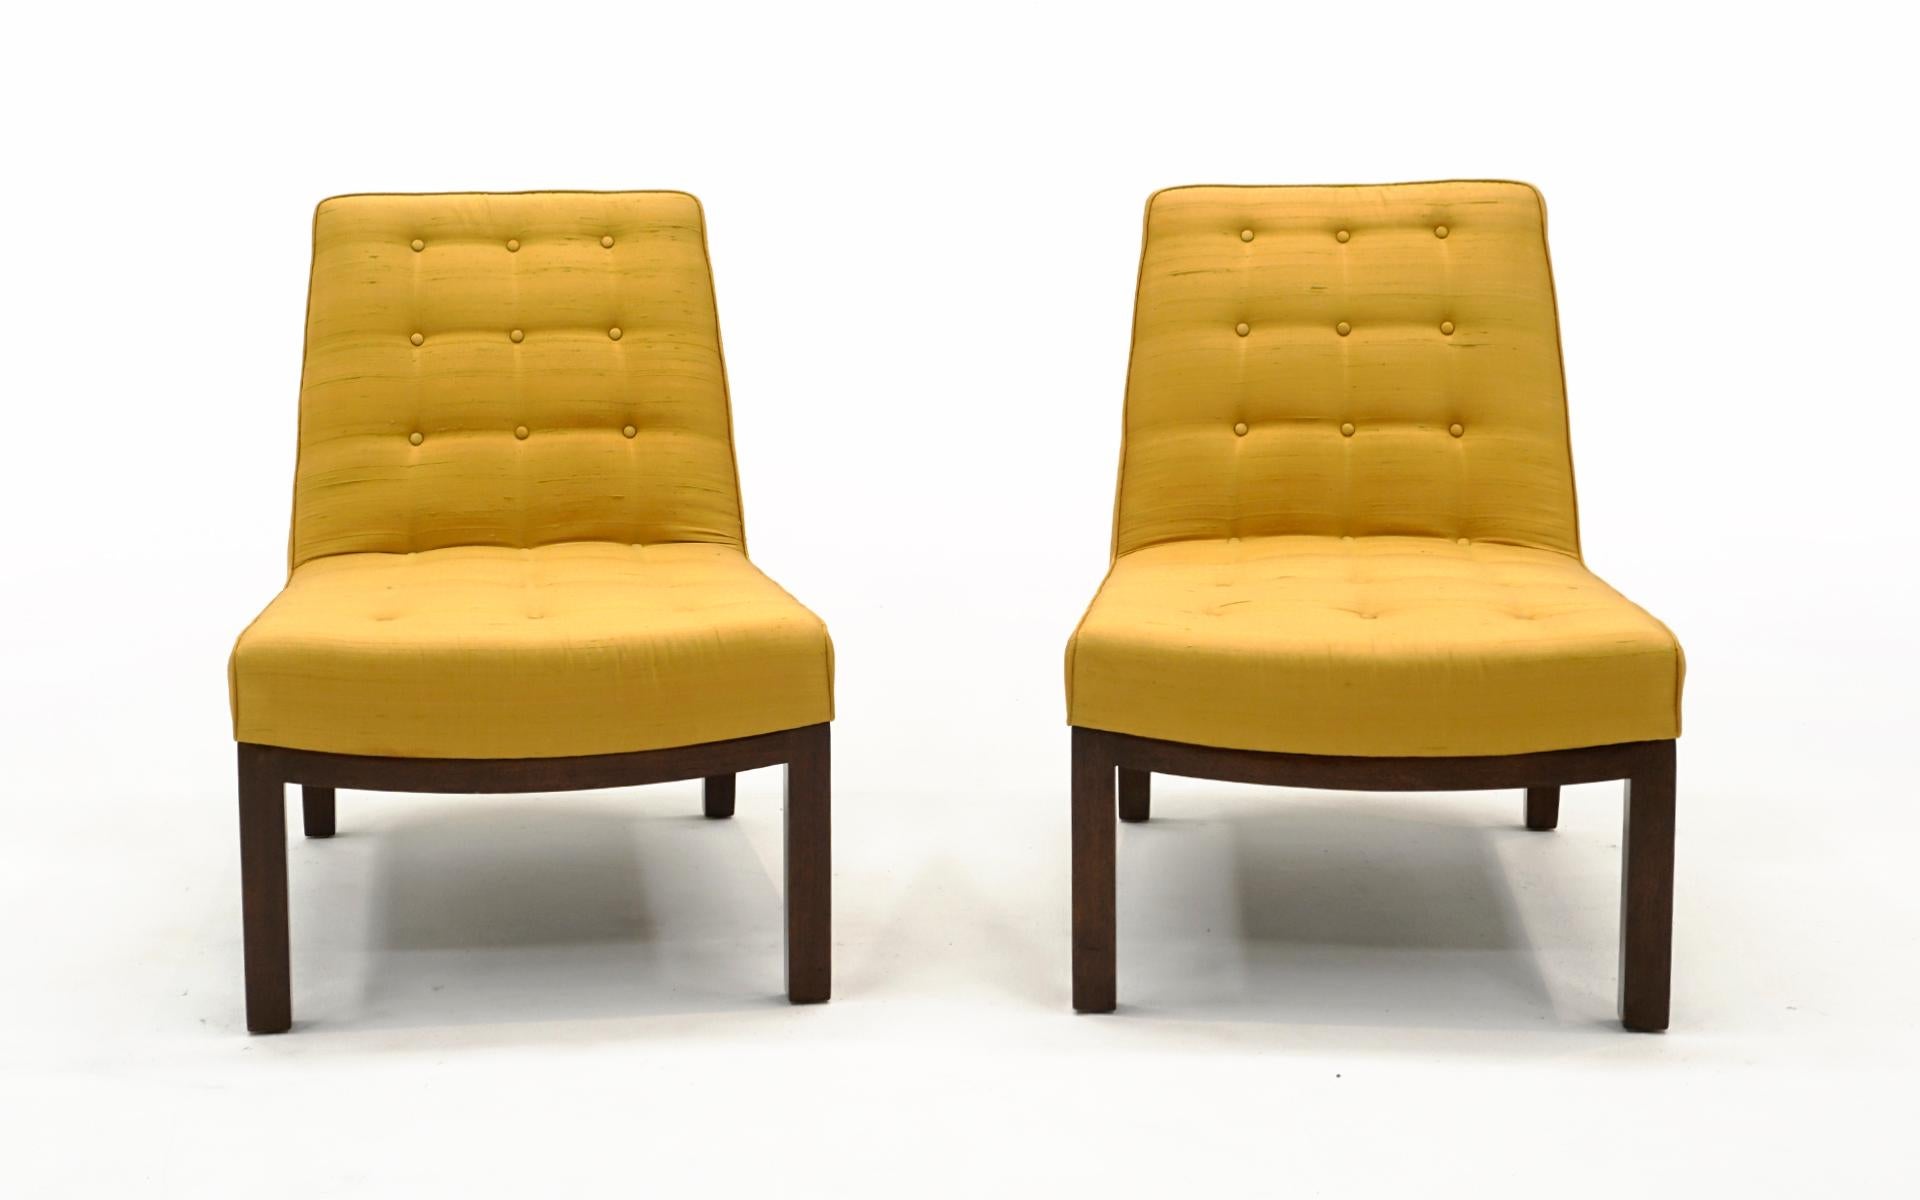 Beautiful and elegant pair of armless slipper / lounge chairs designed by Edward Wormley for Dunbar. These are in completely original condition: original yellow silk fabric and original dark finish on the mahogany legs. No stains, tears or repairs.